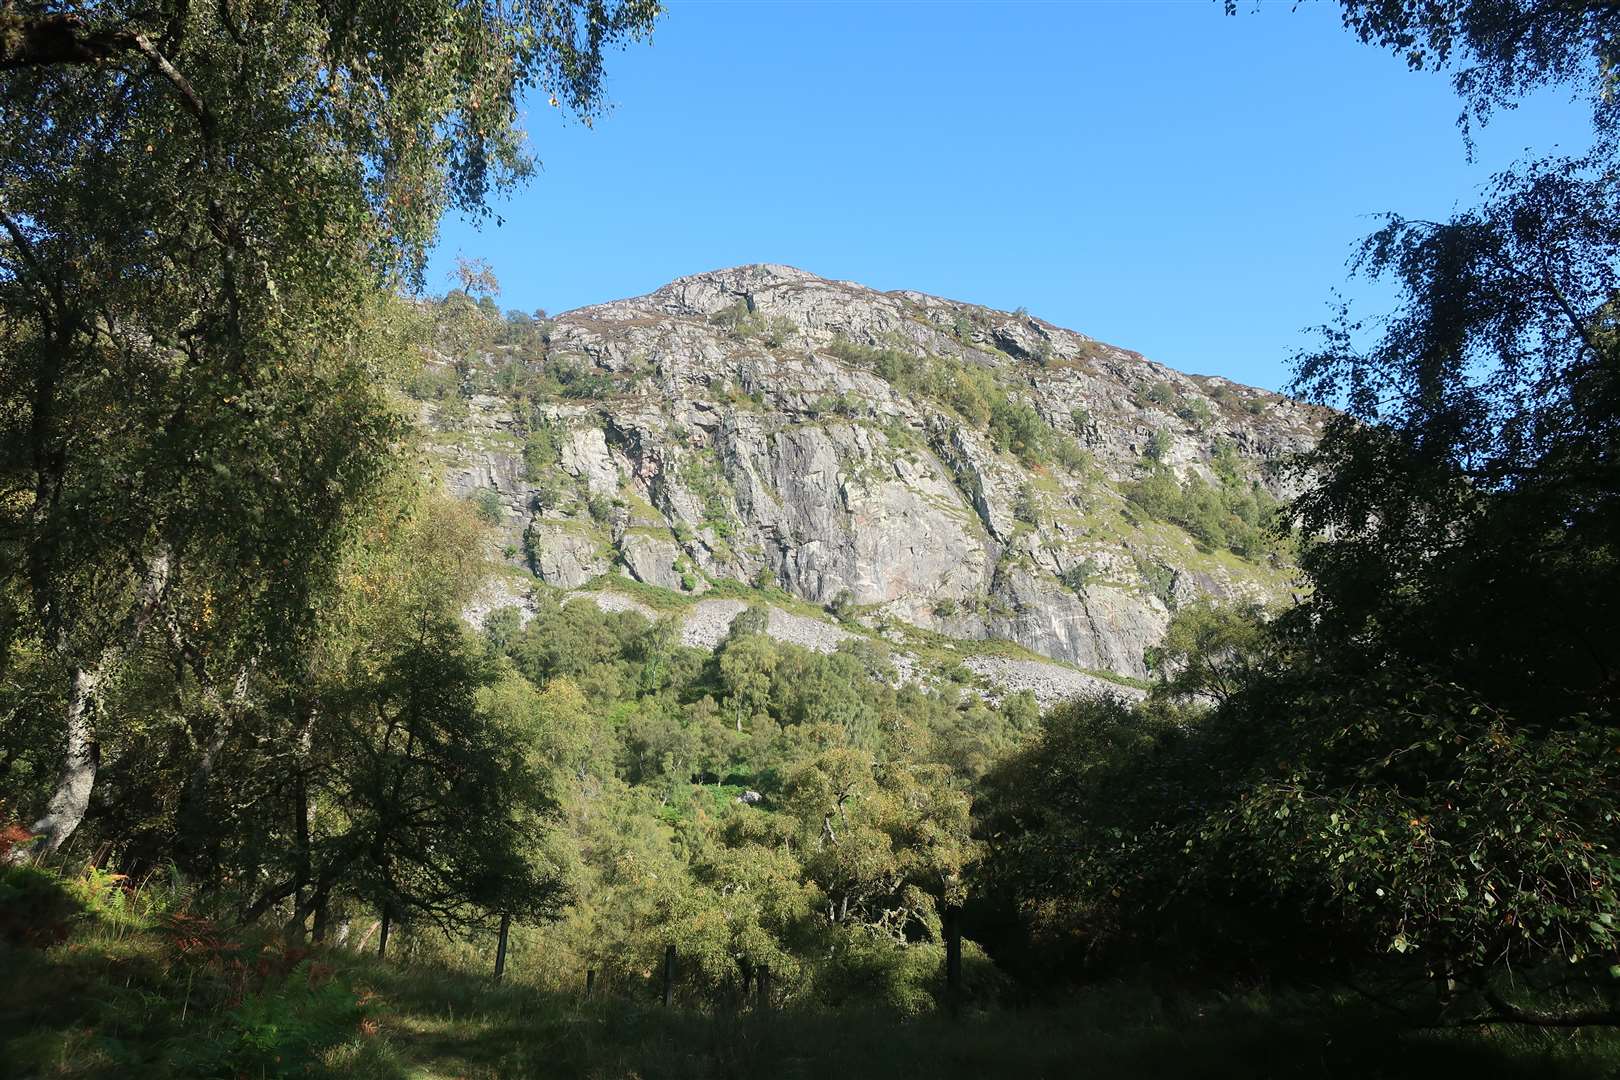 The crags on Creag Dhubh are popular with climbers.